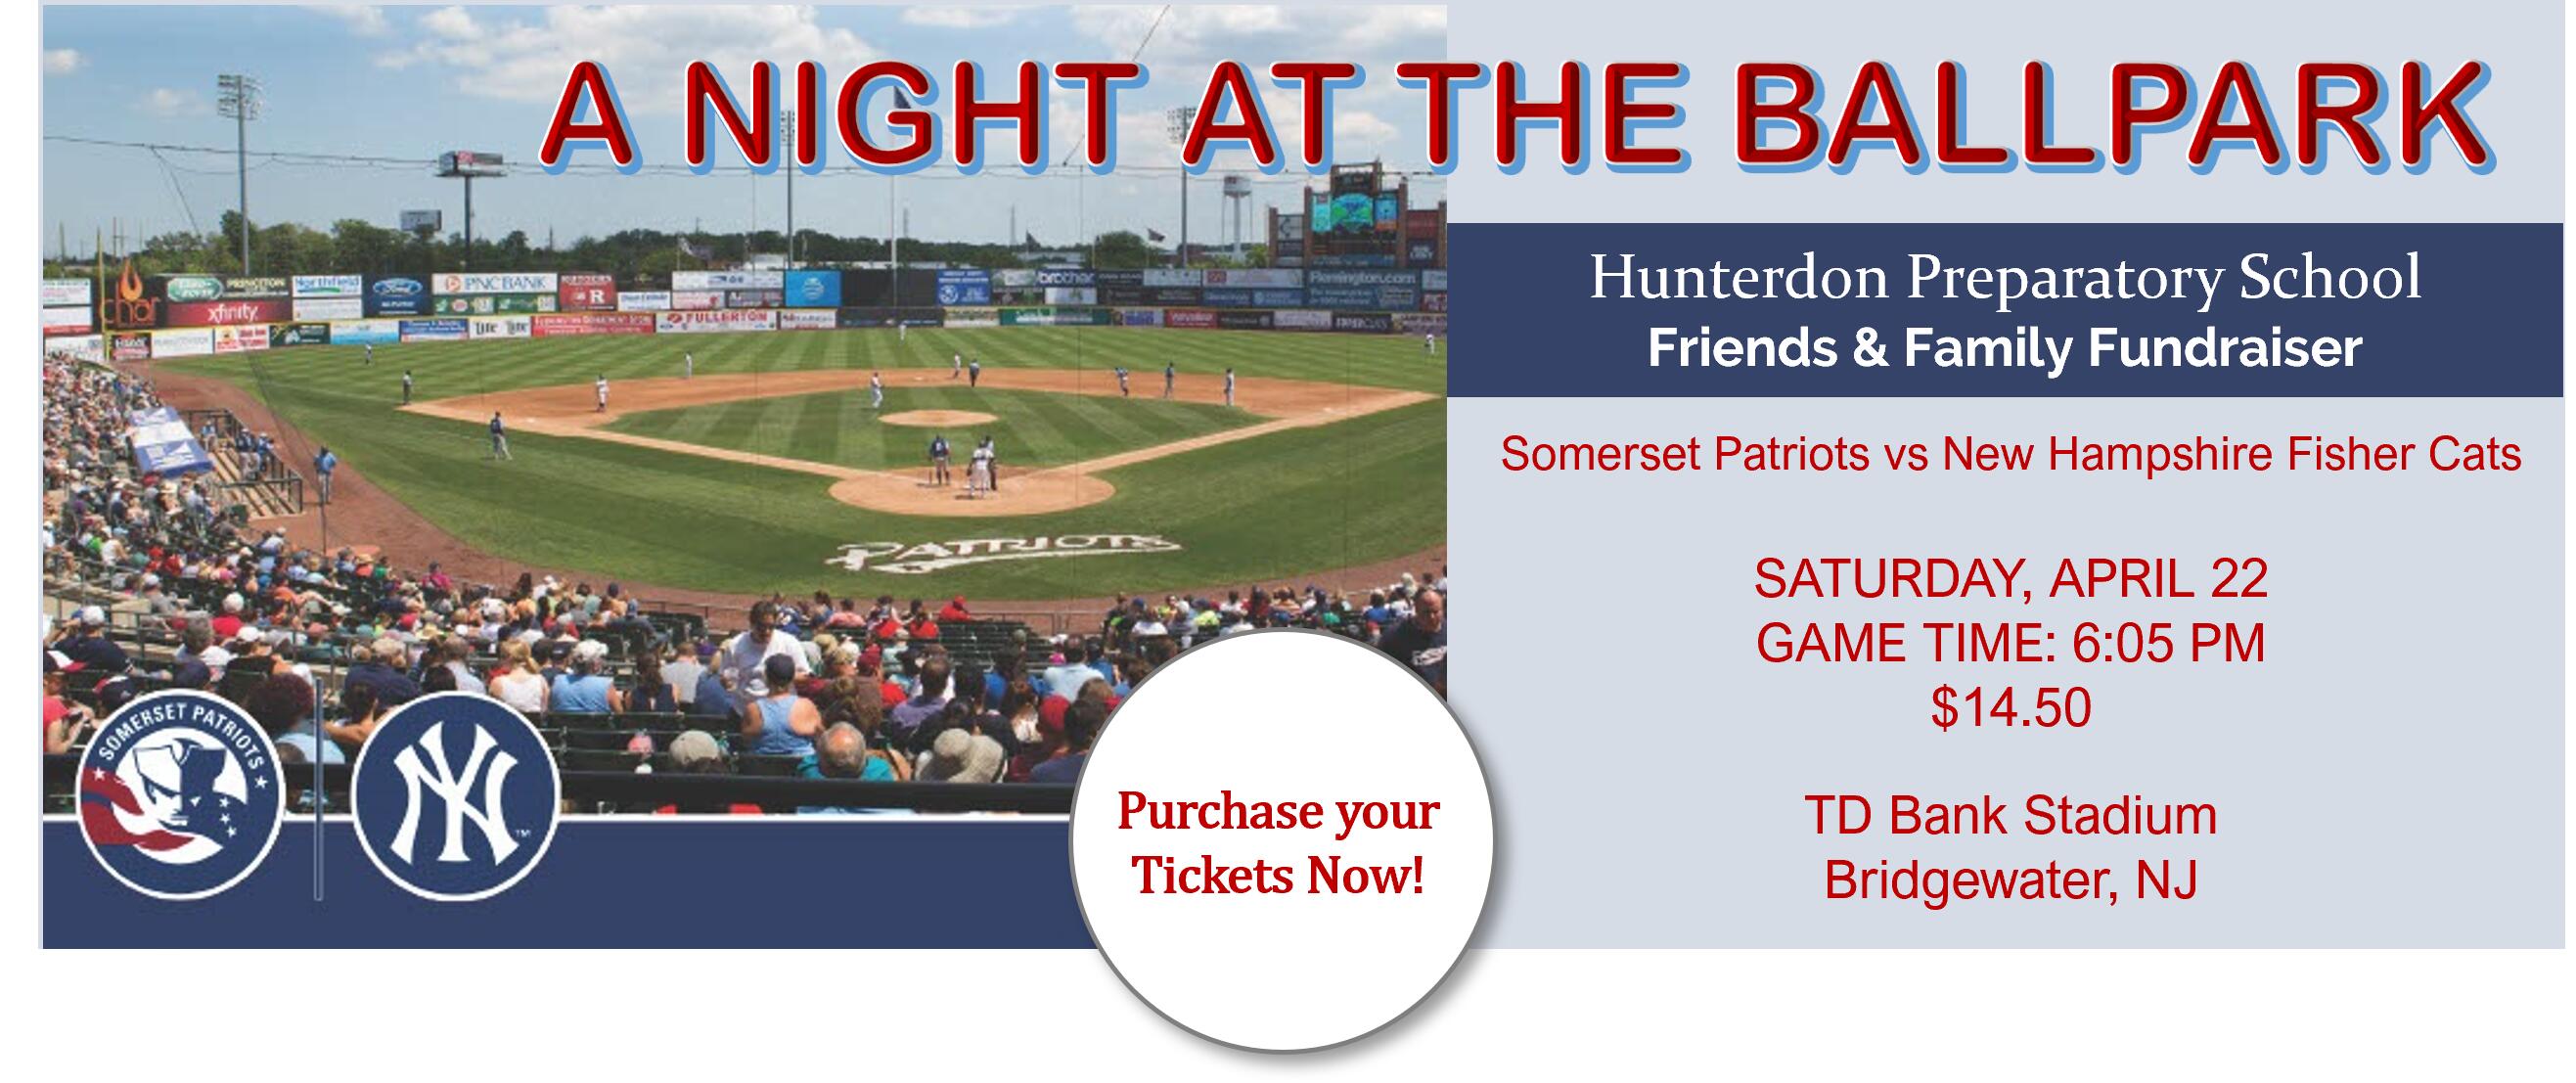 A Day at the Ballpark. Support Hunterdon Prep and see a Somerset Patriots game